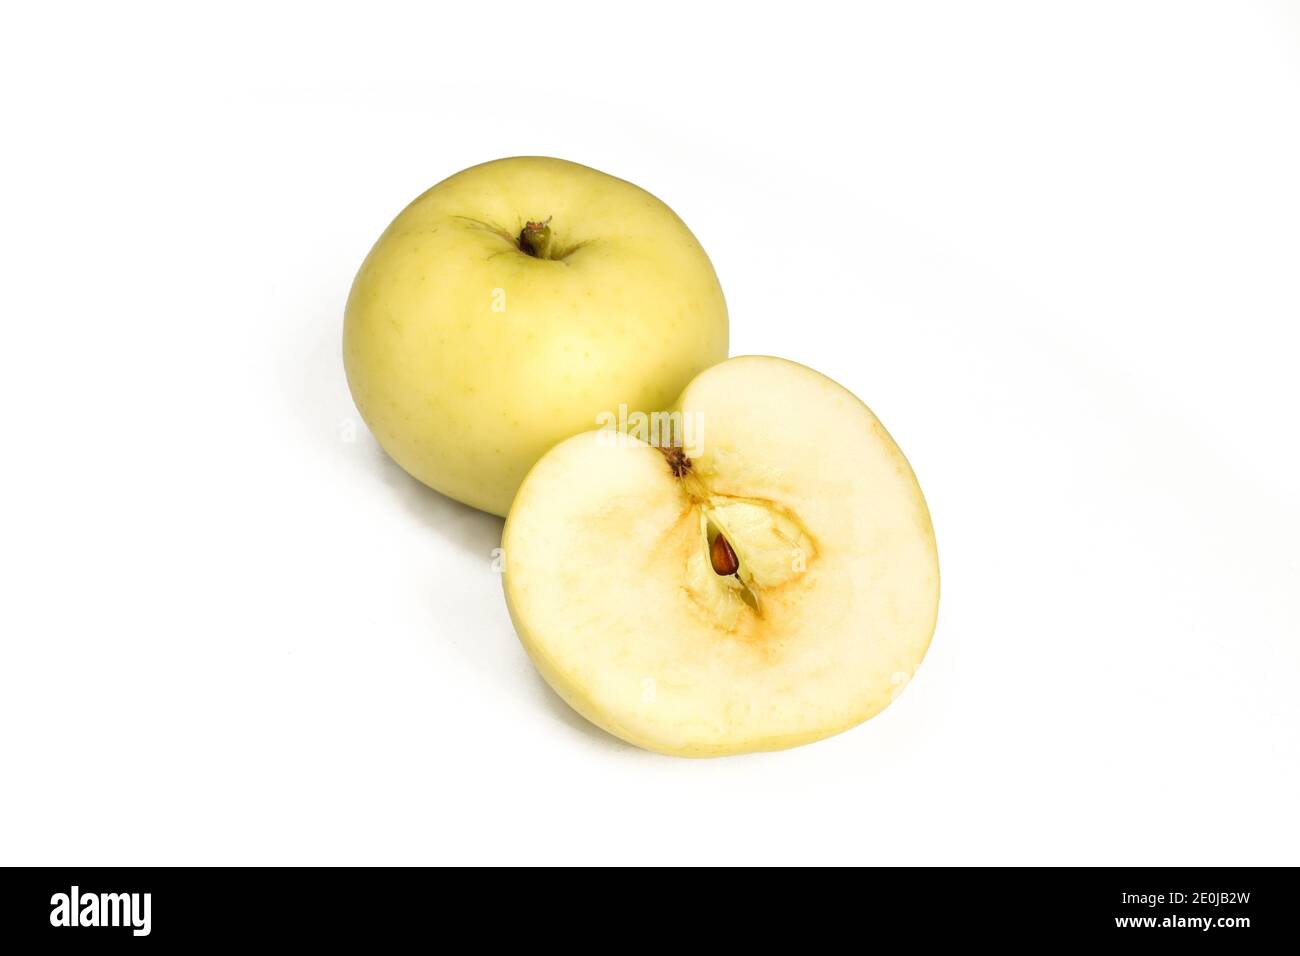 One and a half apple isolated on white background. Yellow fruit sliced Stock Photo